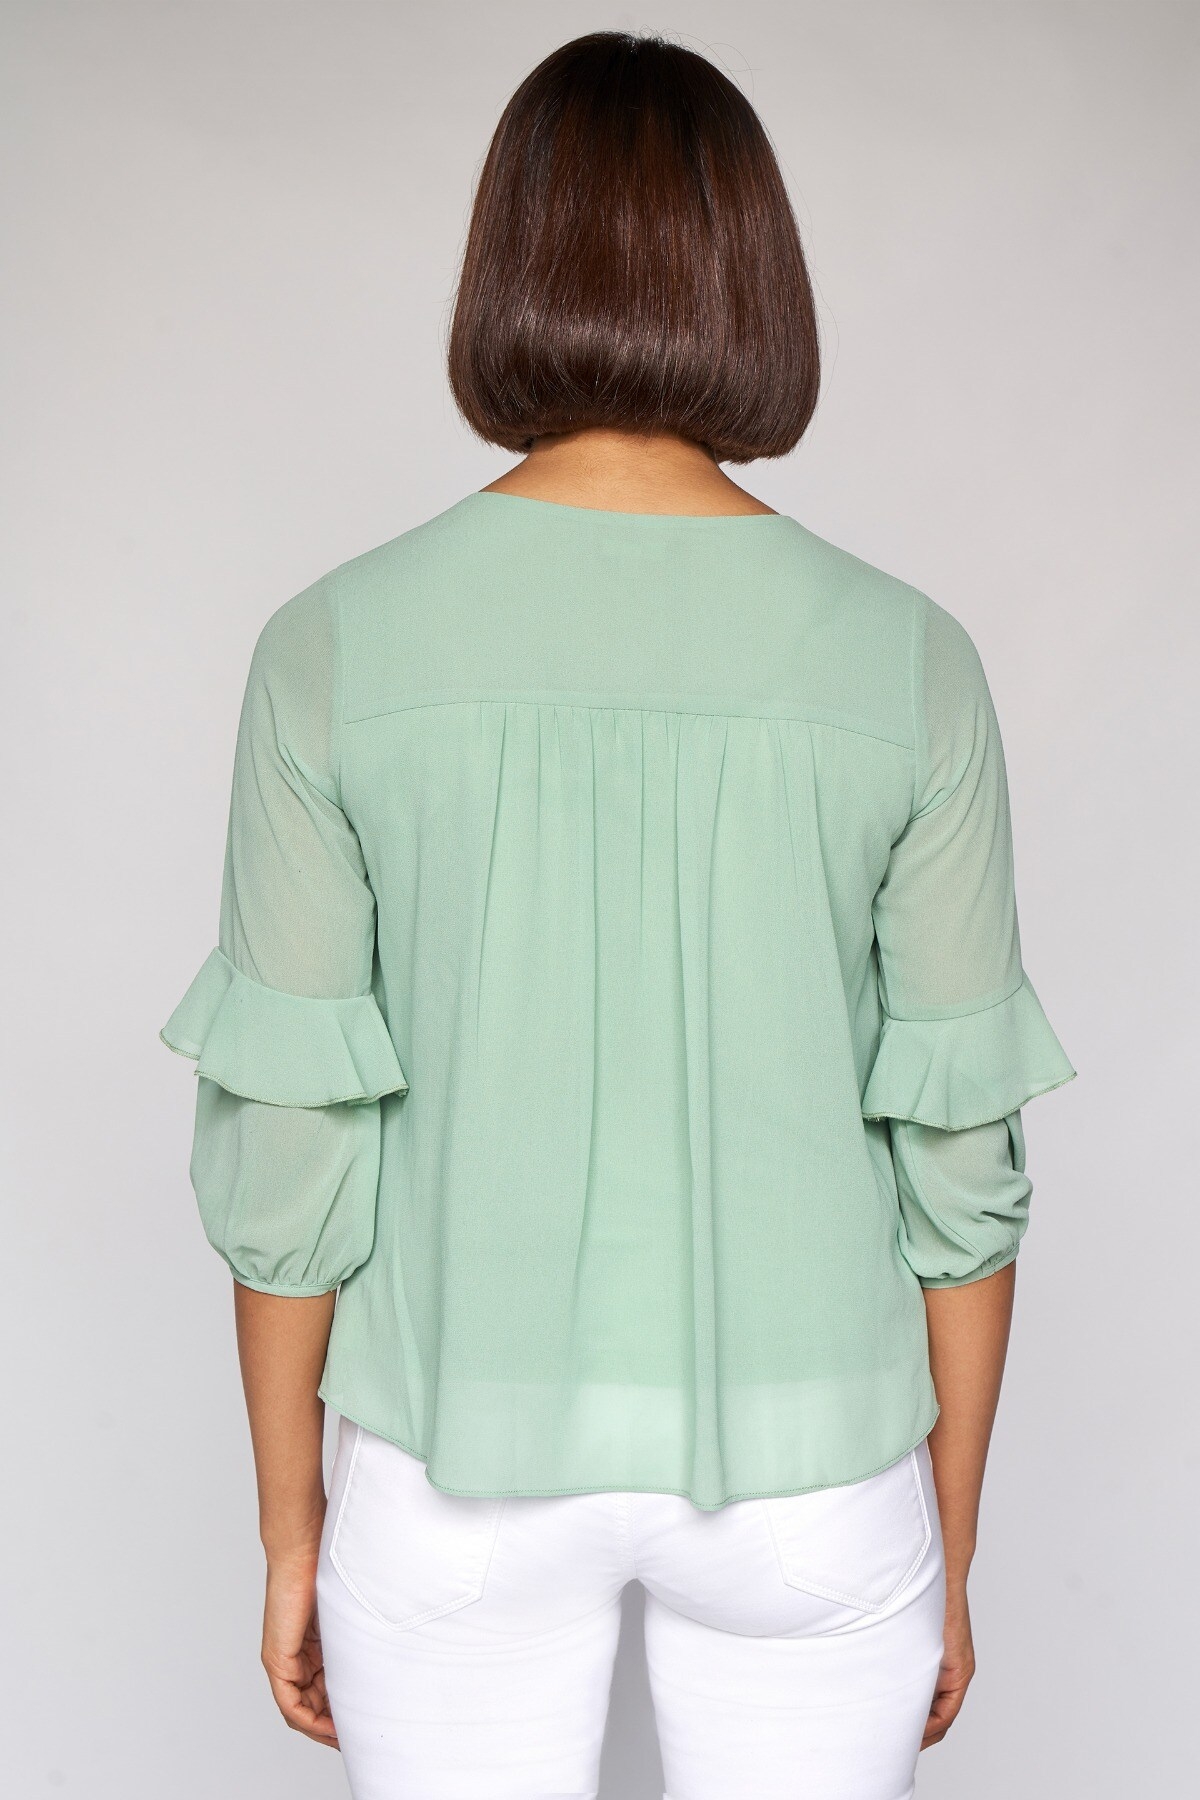 AND | AND SAGE GREEN TOP 3